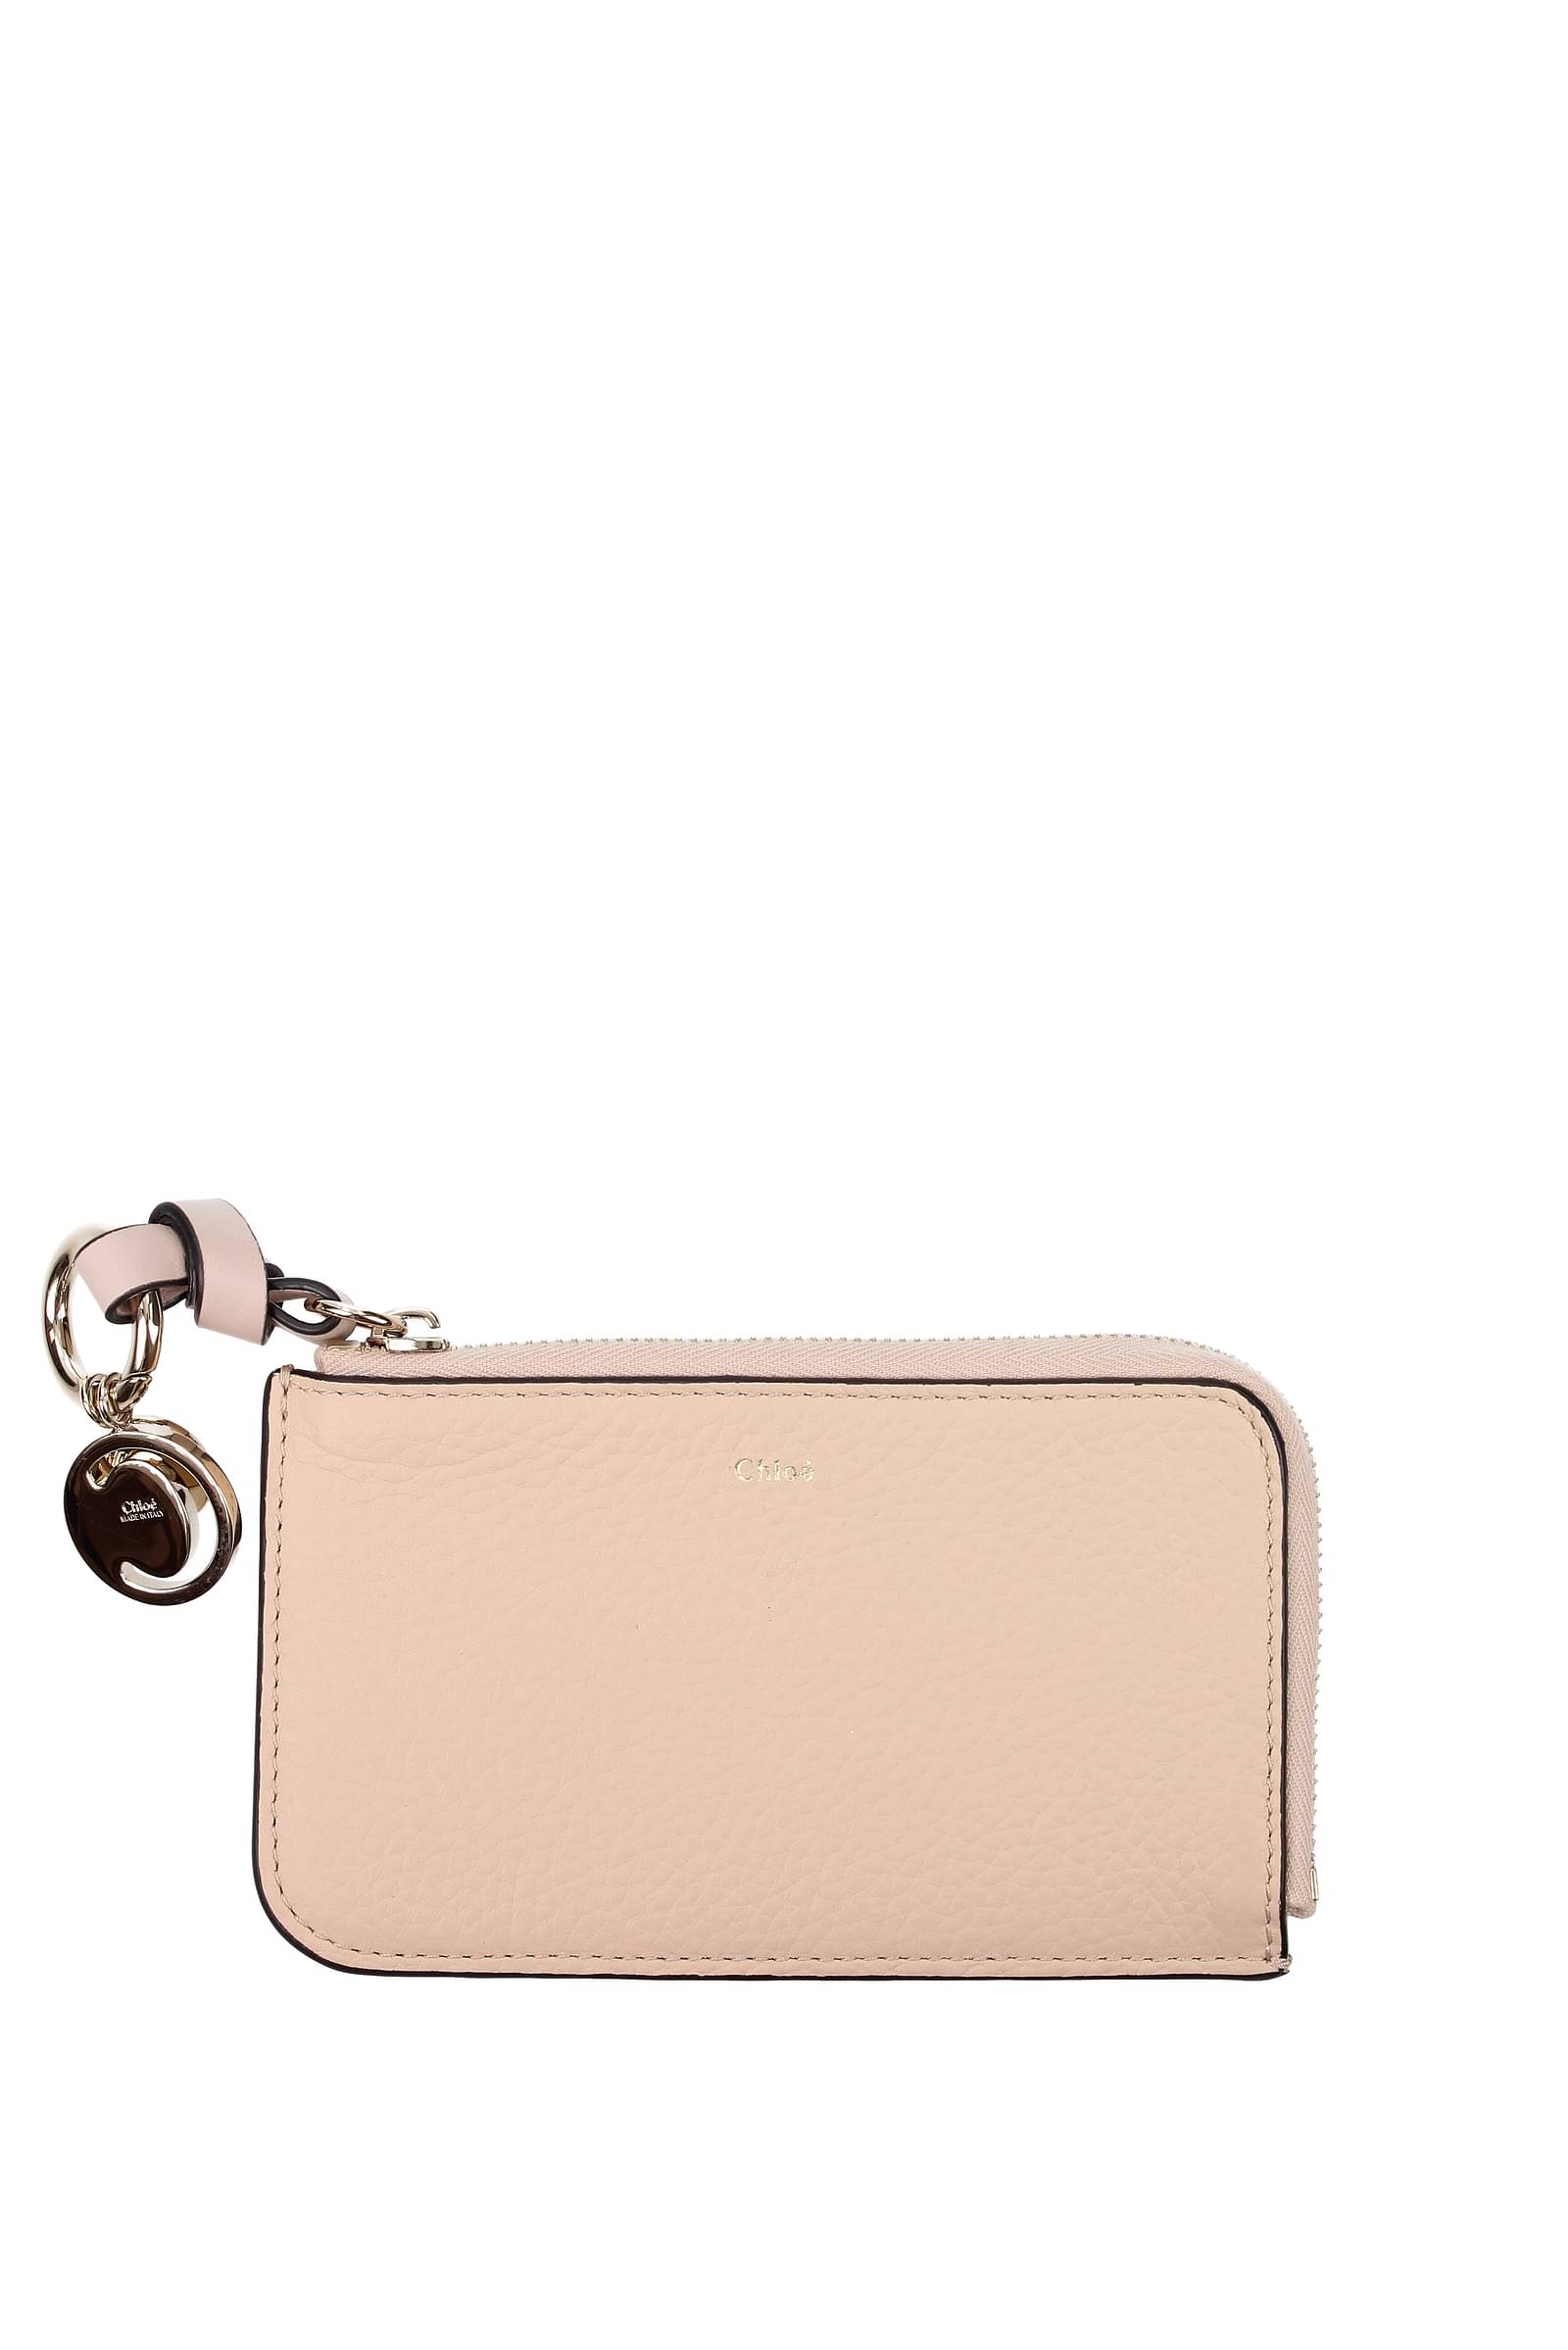 See by Chloé Two tone pink leather handbag. | Drouot.com